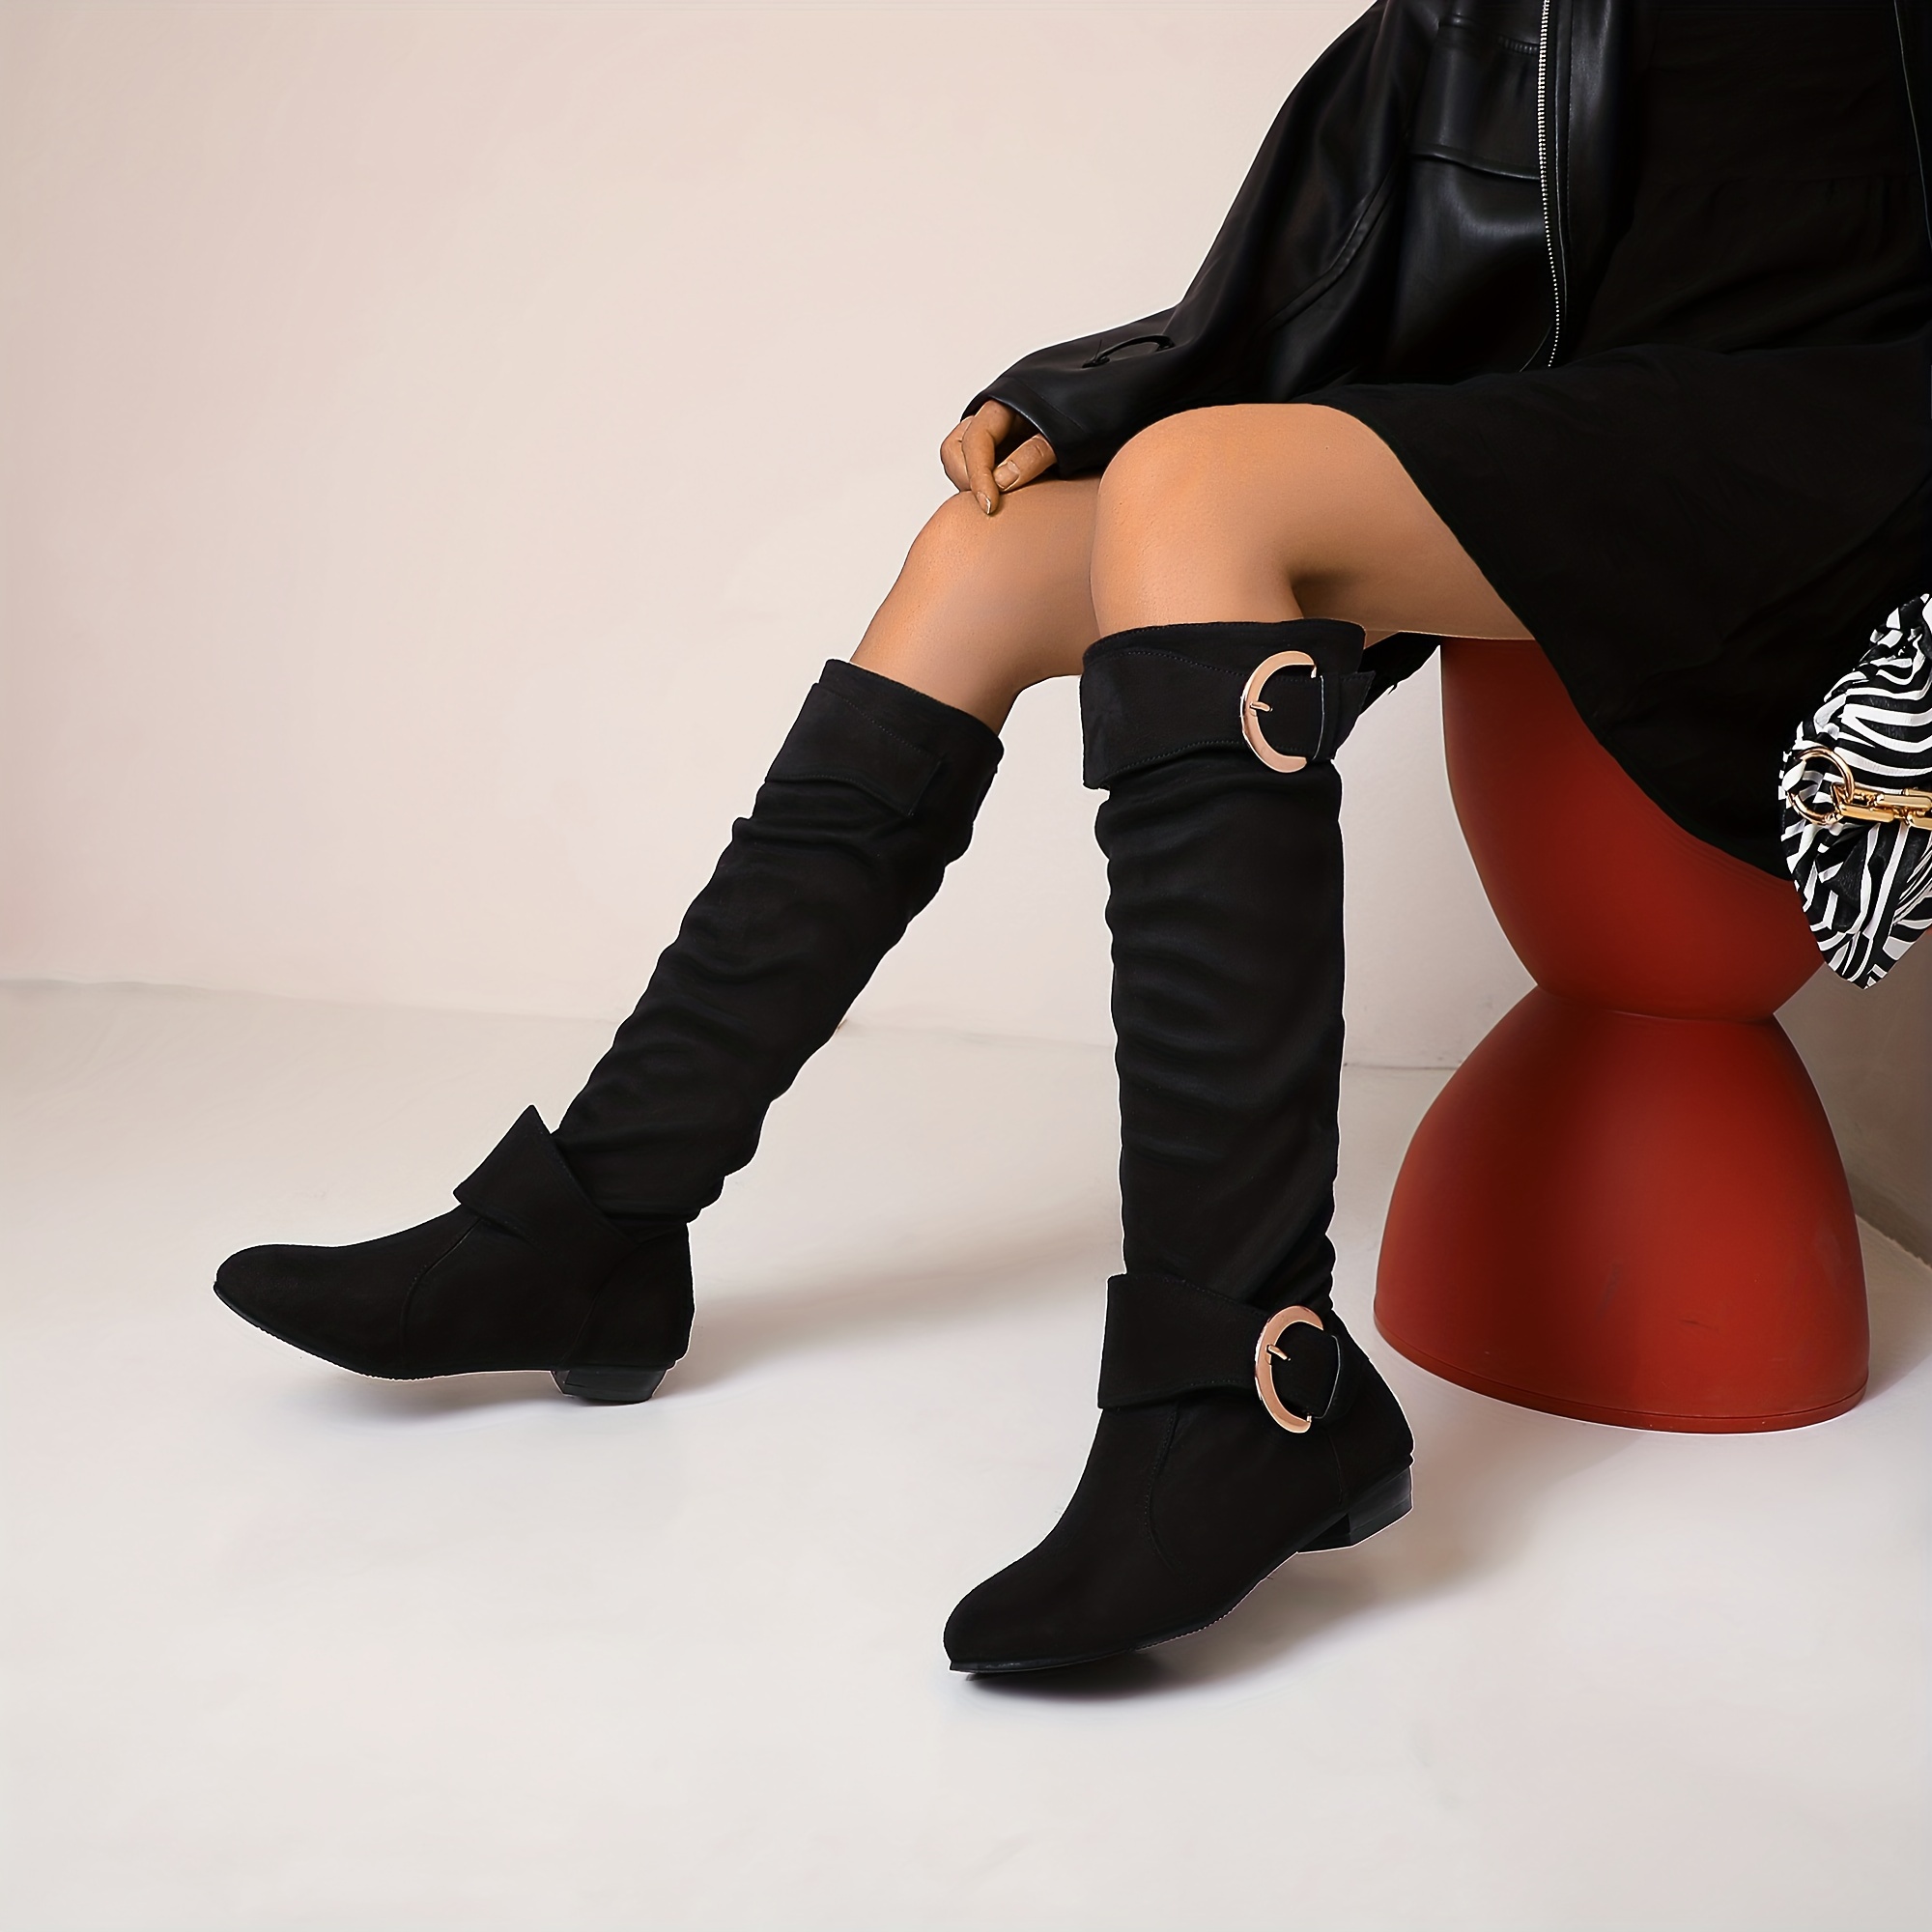 Slouchy Knee High Flat Boots